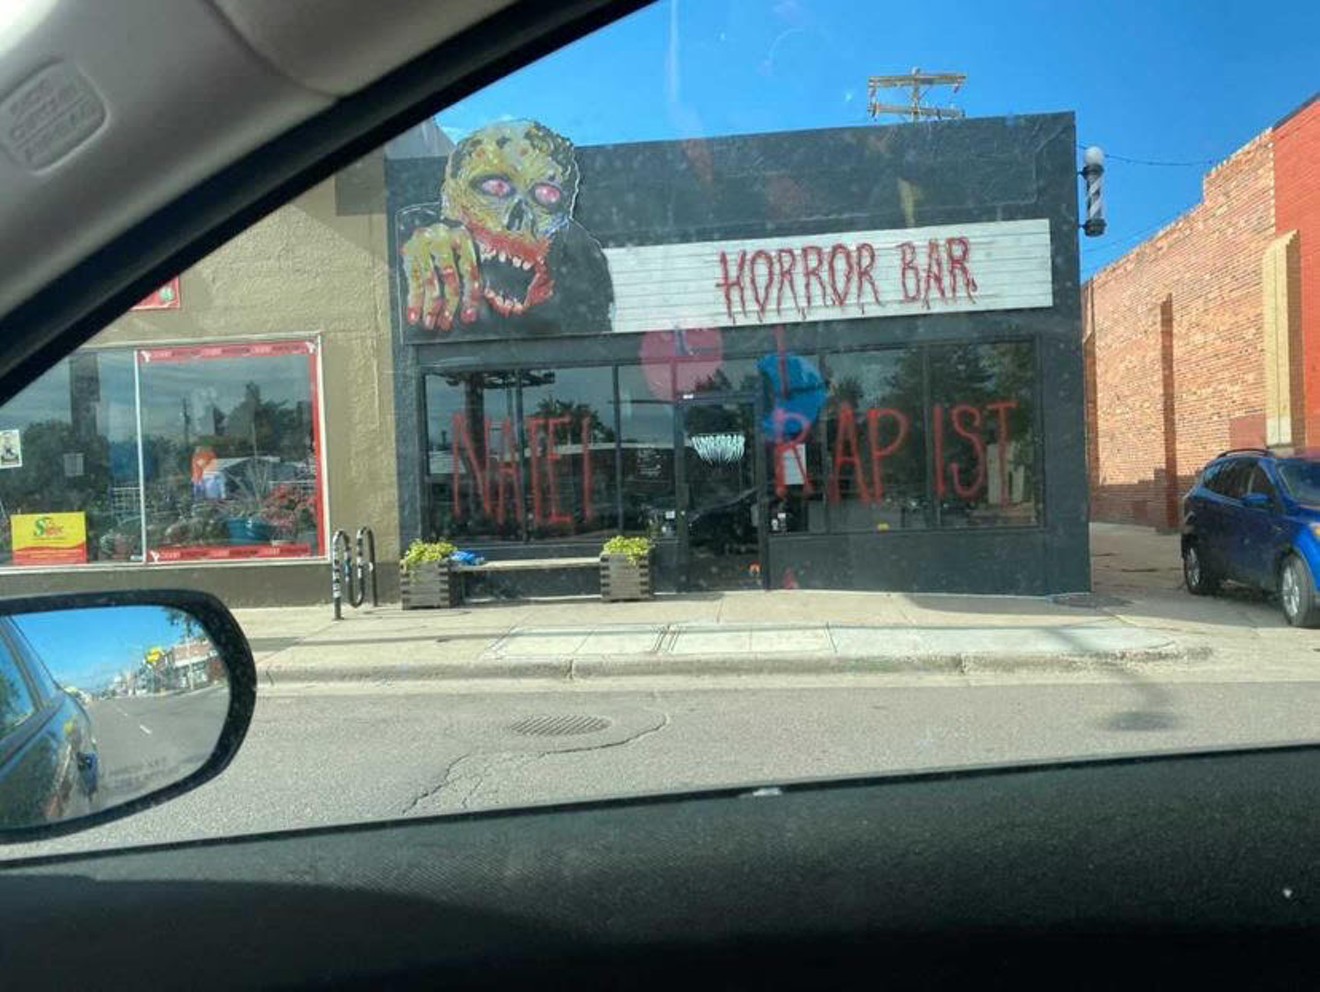 The Horror Bar window was tagged at the end of June, as allegations surfaced.